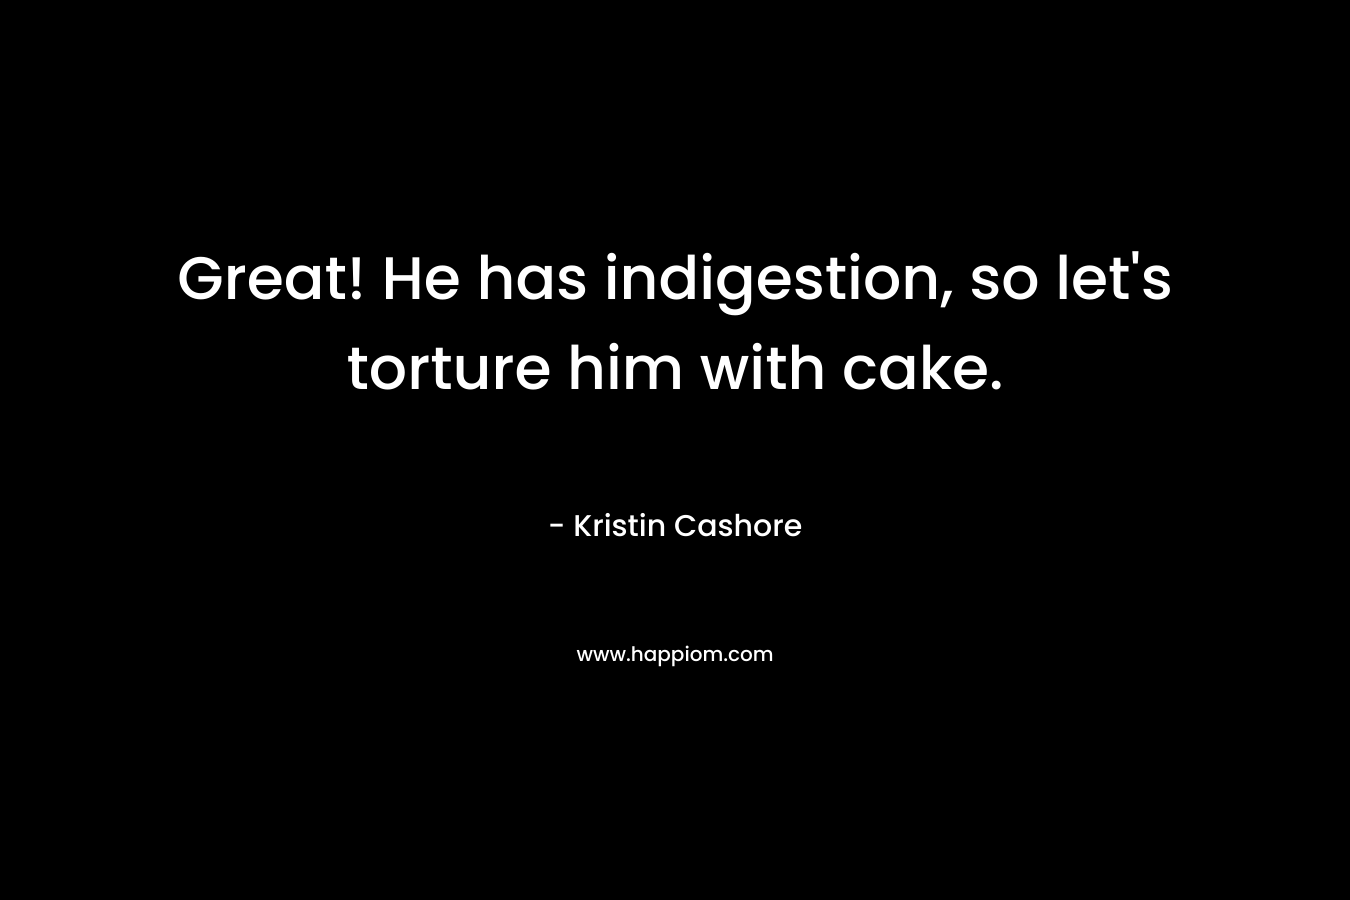 Great! He has indigestion, so let's torture him with cake.